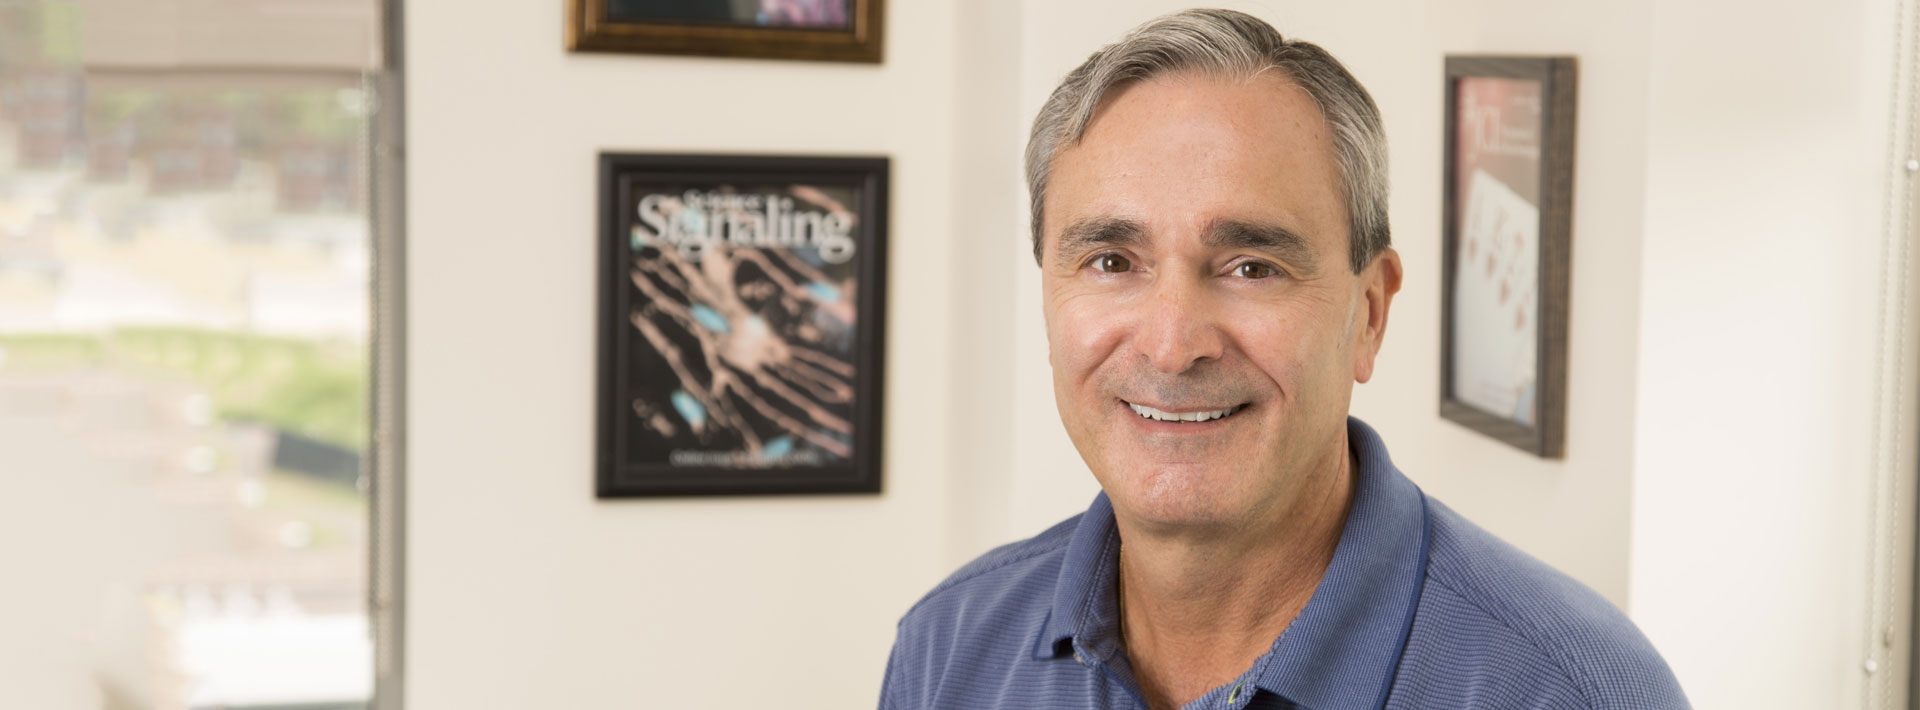 Bill Sessa is Ready to Deliver Breakthroughs for Common Diseases 